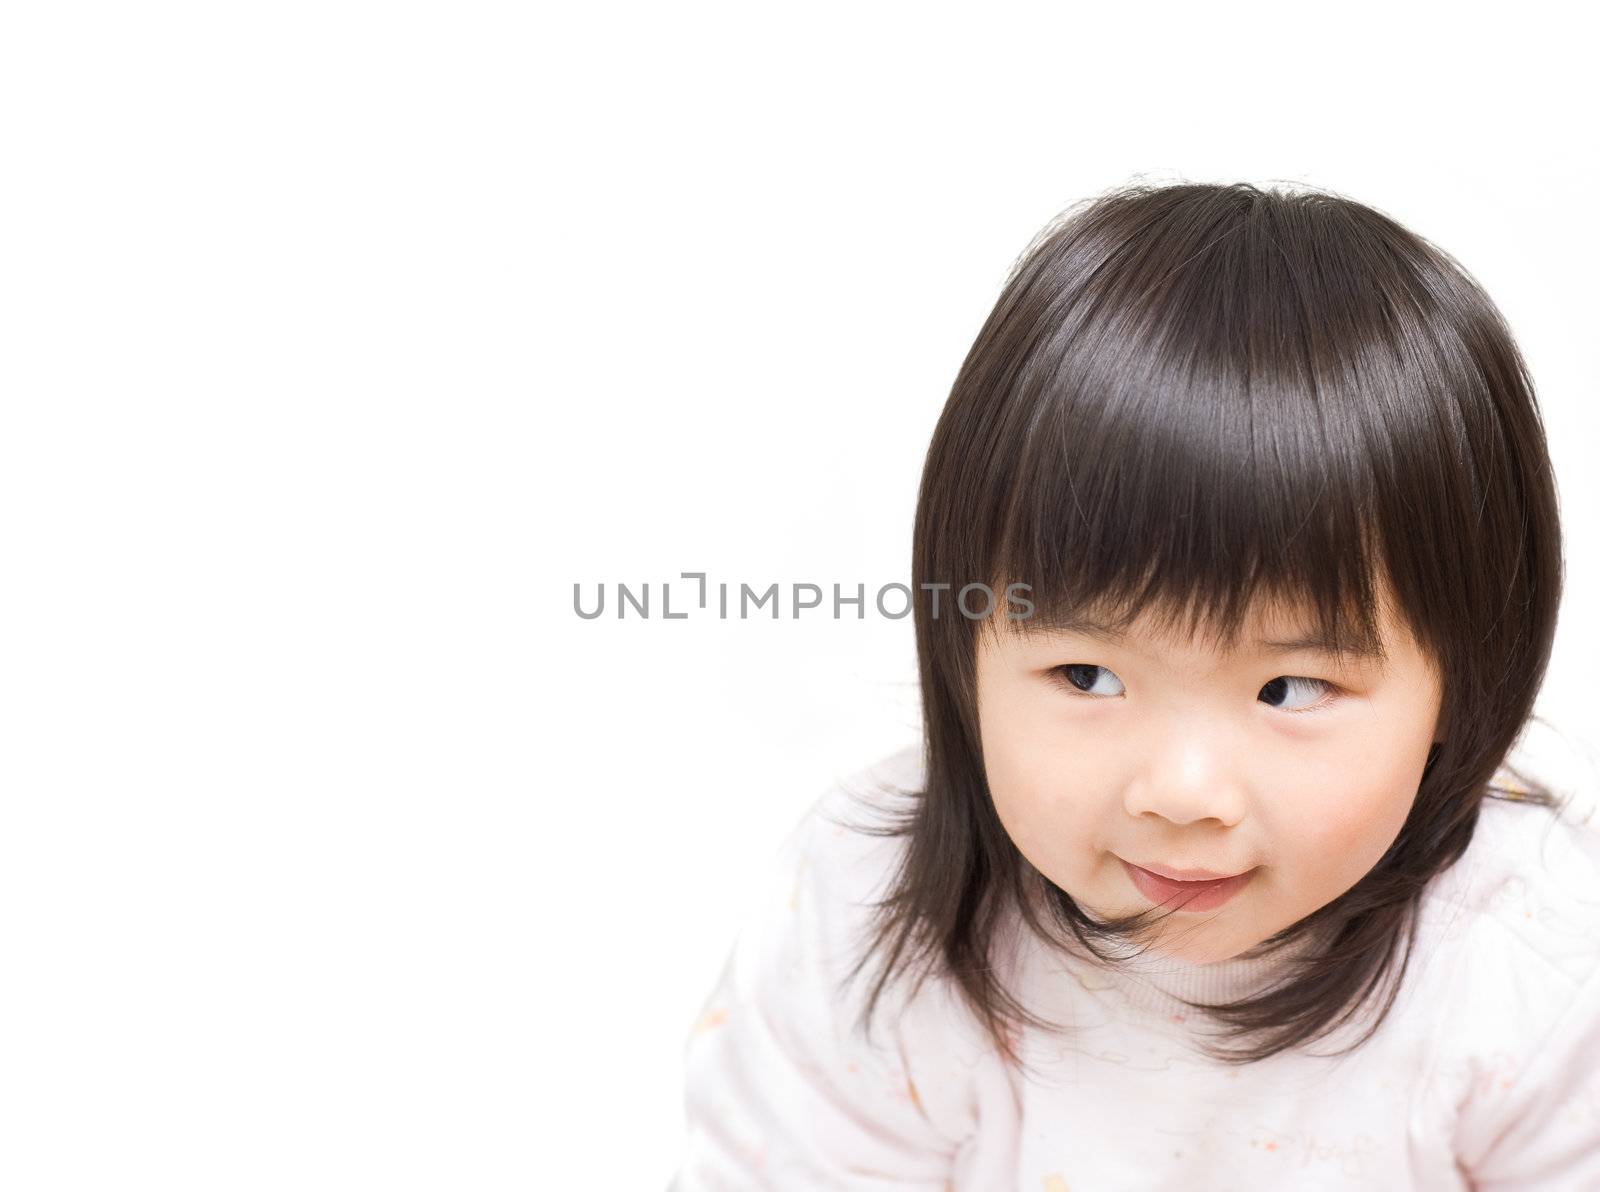 Sly Asian girl portrait with funny face.